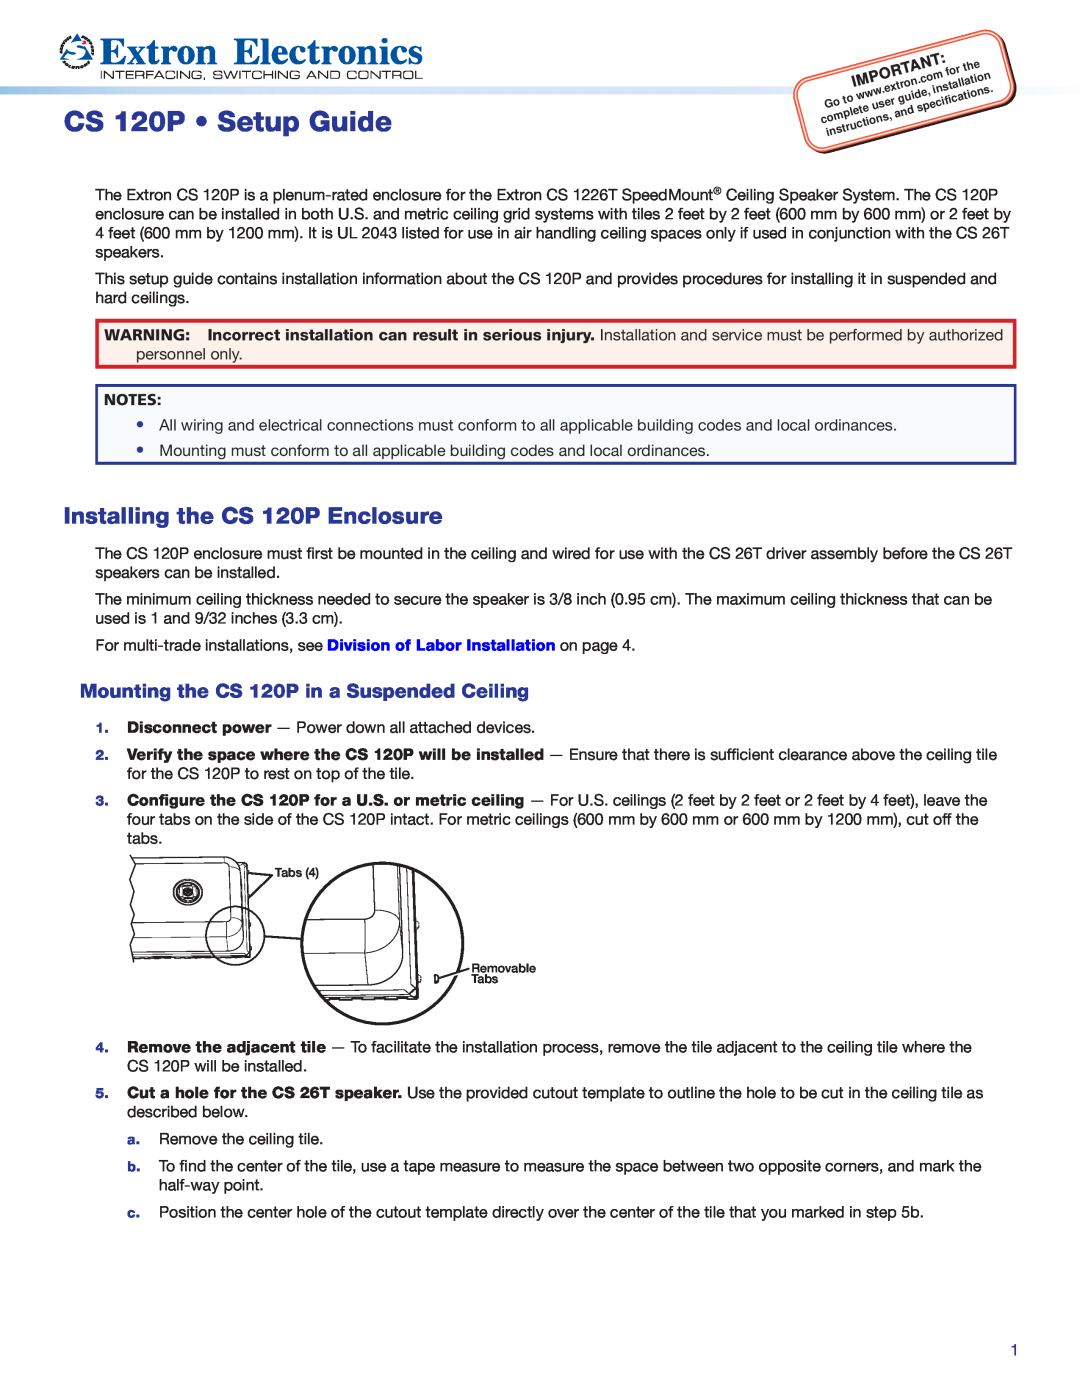 Extron electronic setup guide CS 120P Setup Guide, Mounting the CS 120P in a Suspended Ceiling 